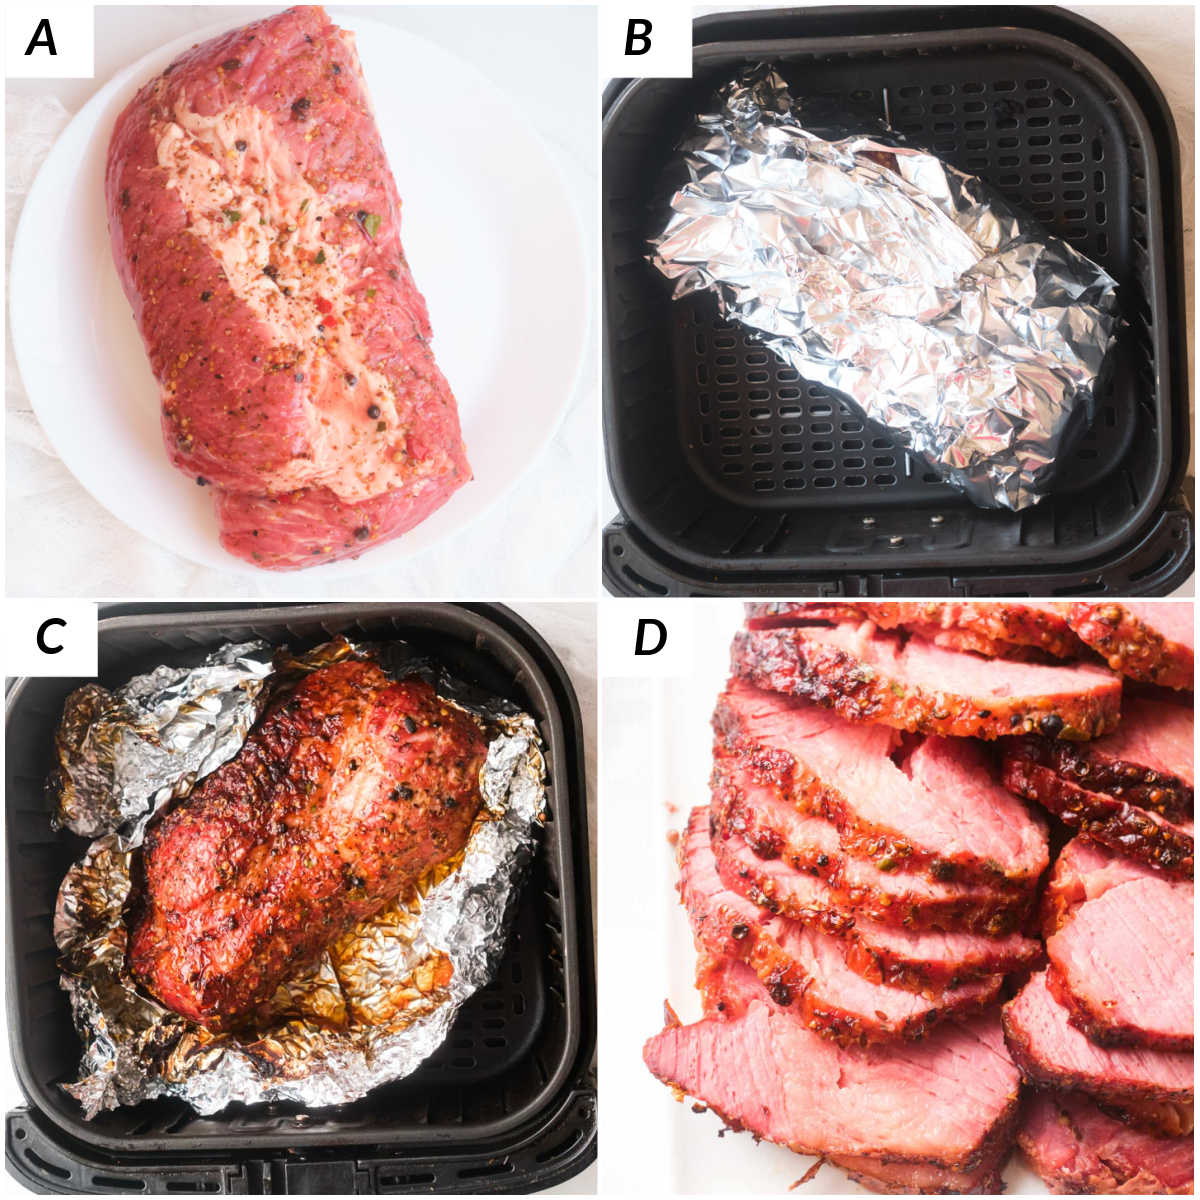 image collage showing the steps for making air fryer corned beef